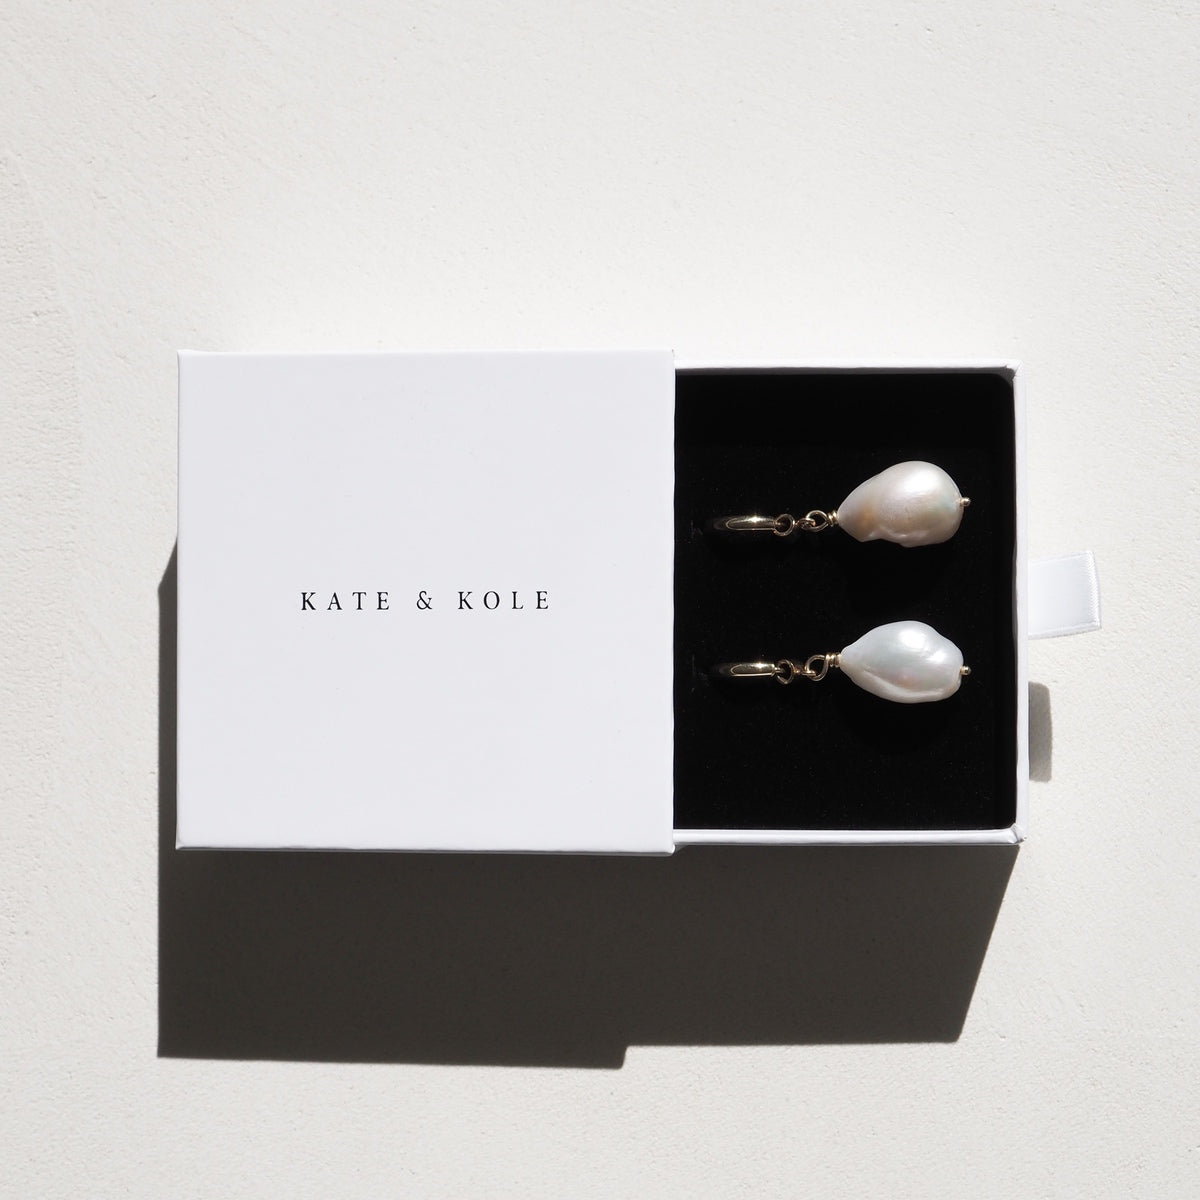 A Kate & Kole jewellery box reveals a complimentary pair of freshwater pearl earrings in 9ct yellow gold, drenched in sun